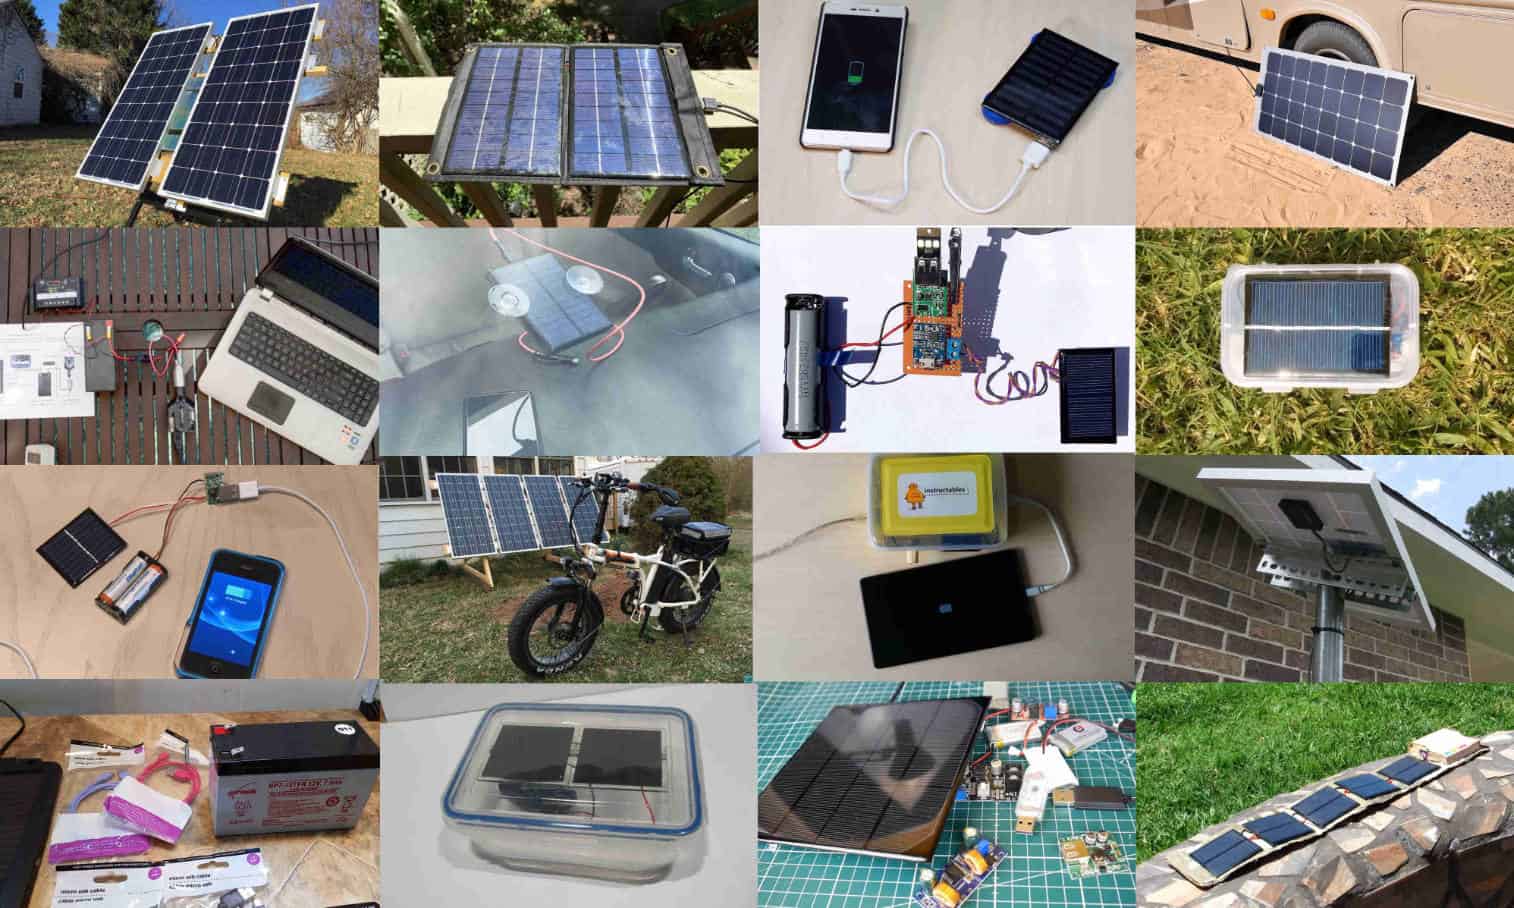 20 DIY Solar Charger Ideas – How to Make a Solar Charger